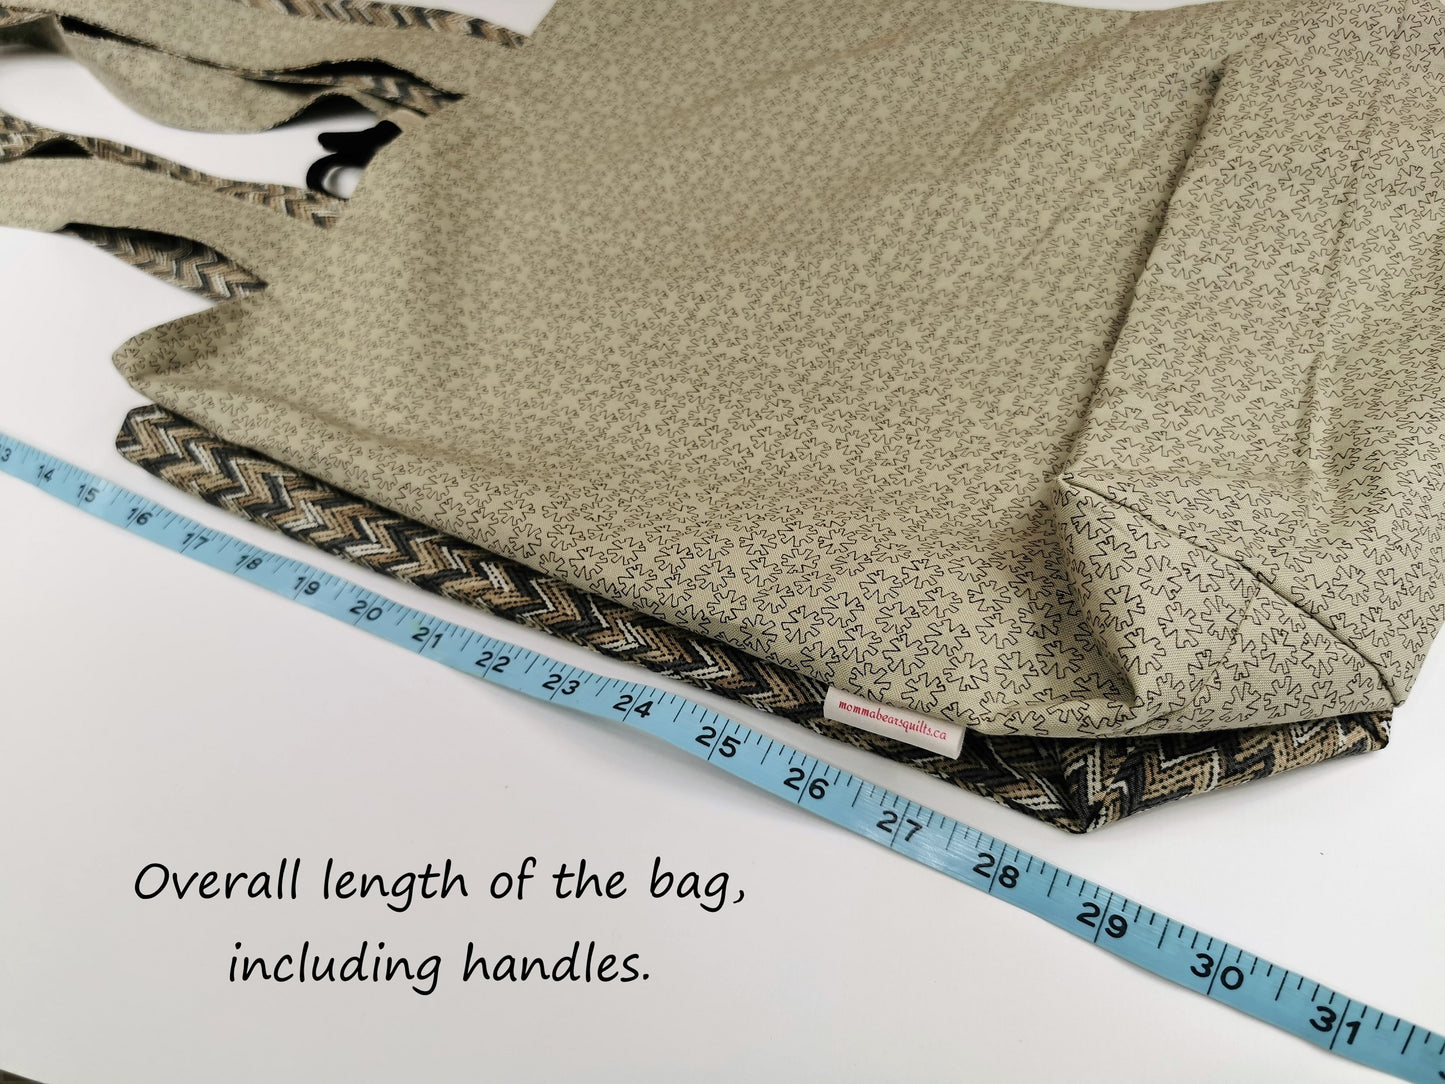 Image shows the overall tote bag length, including handles, is 31 inches.